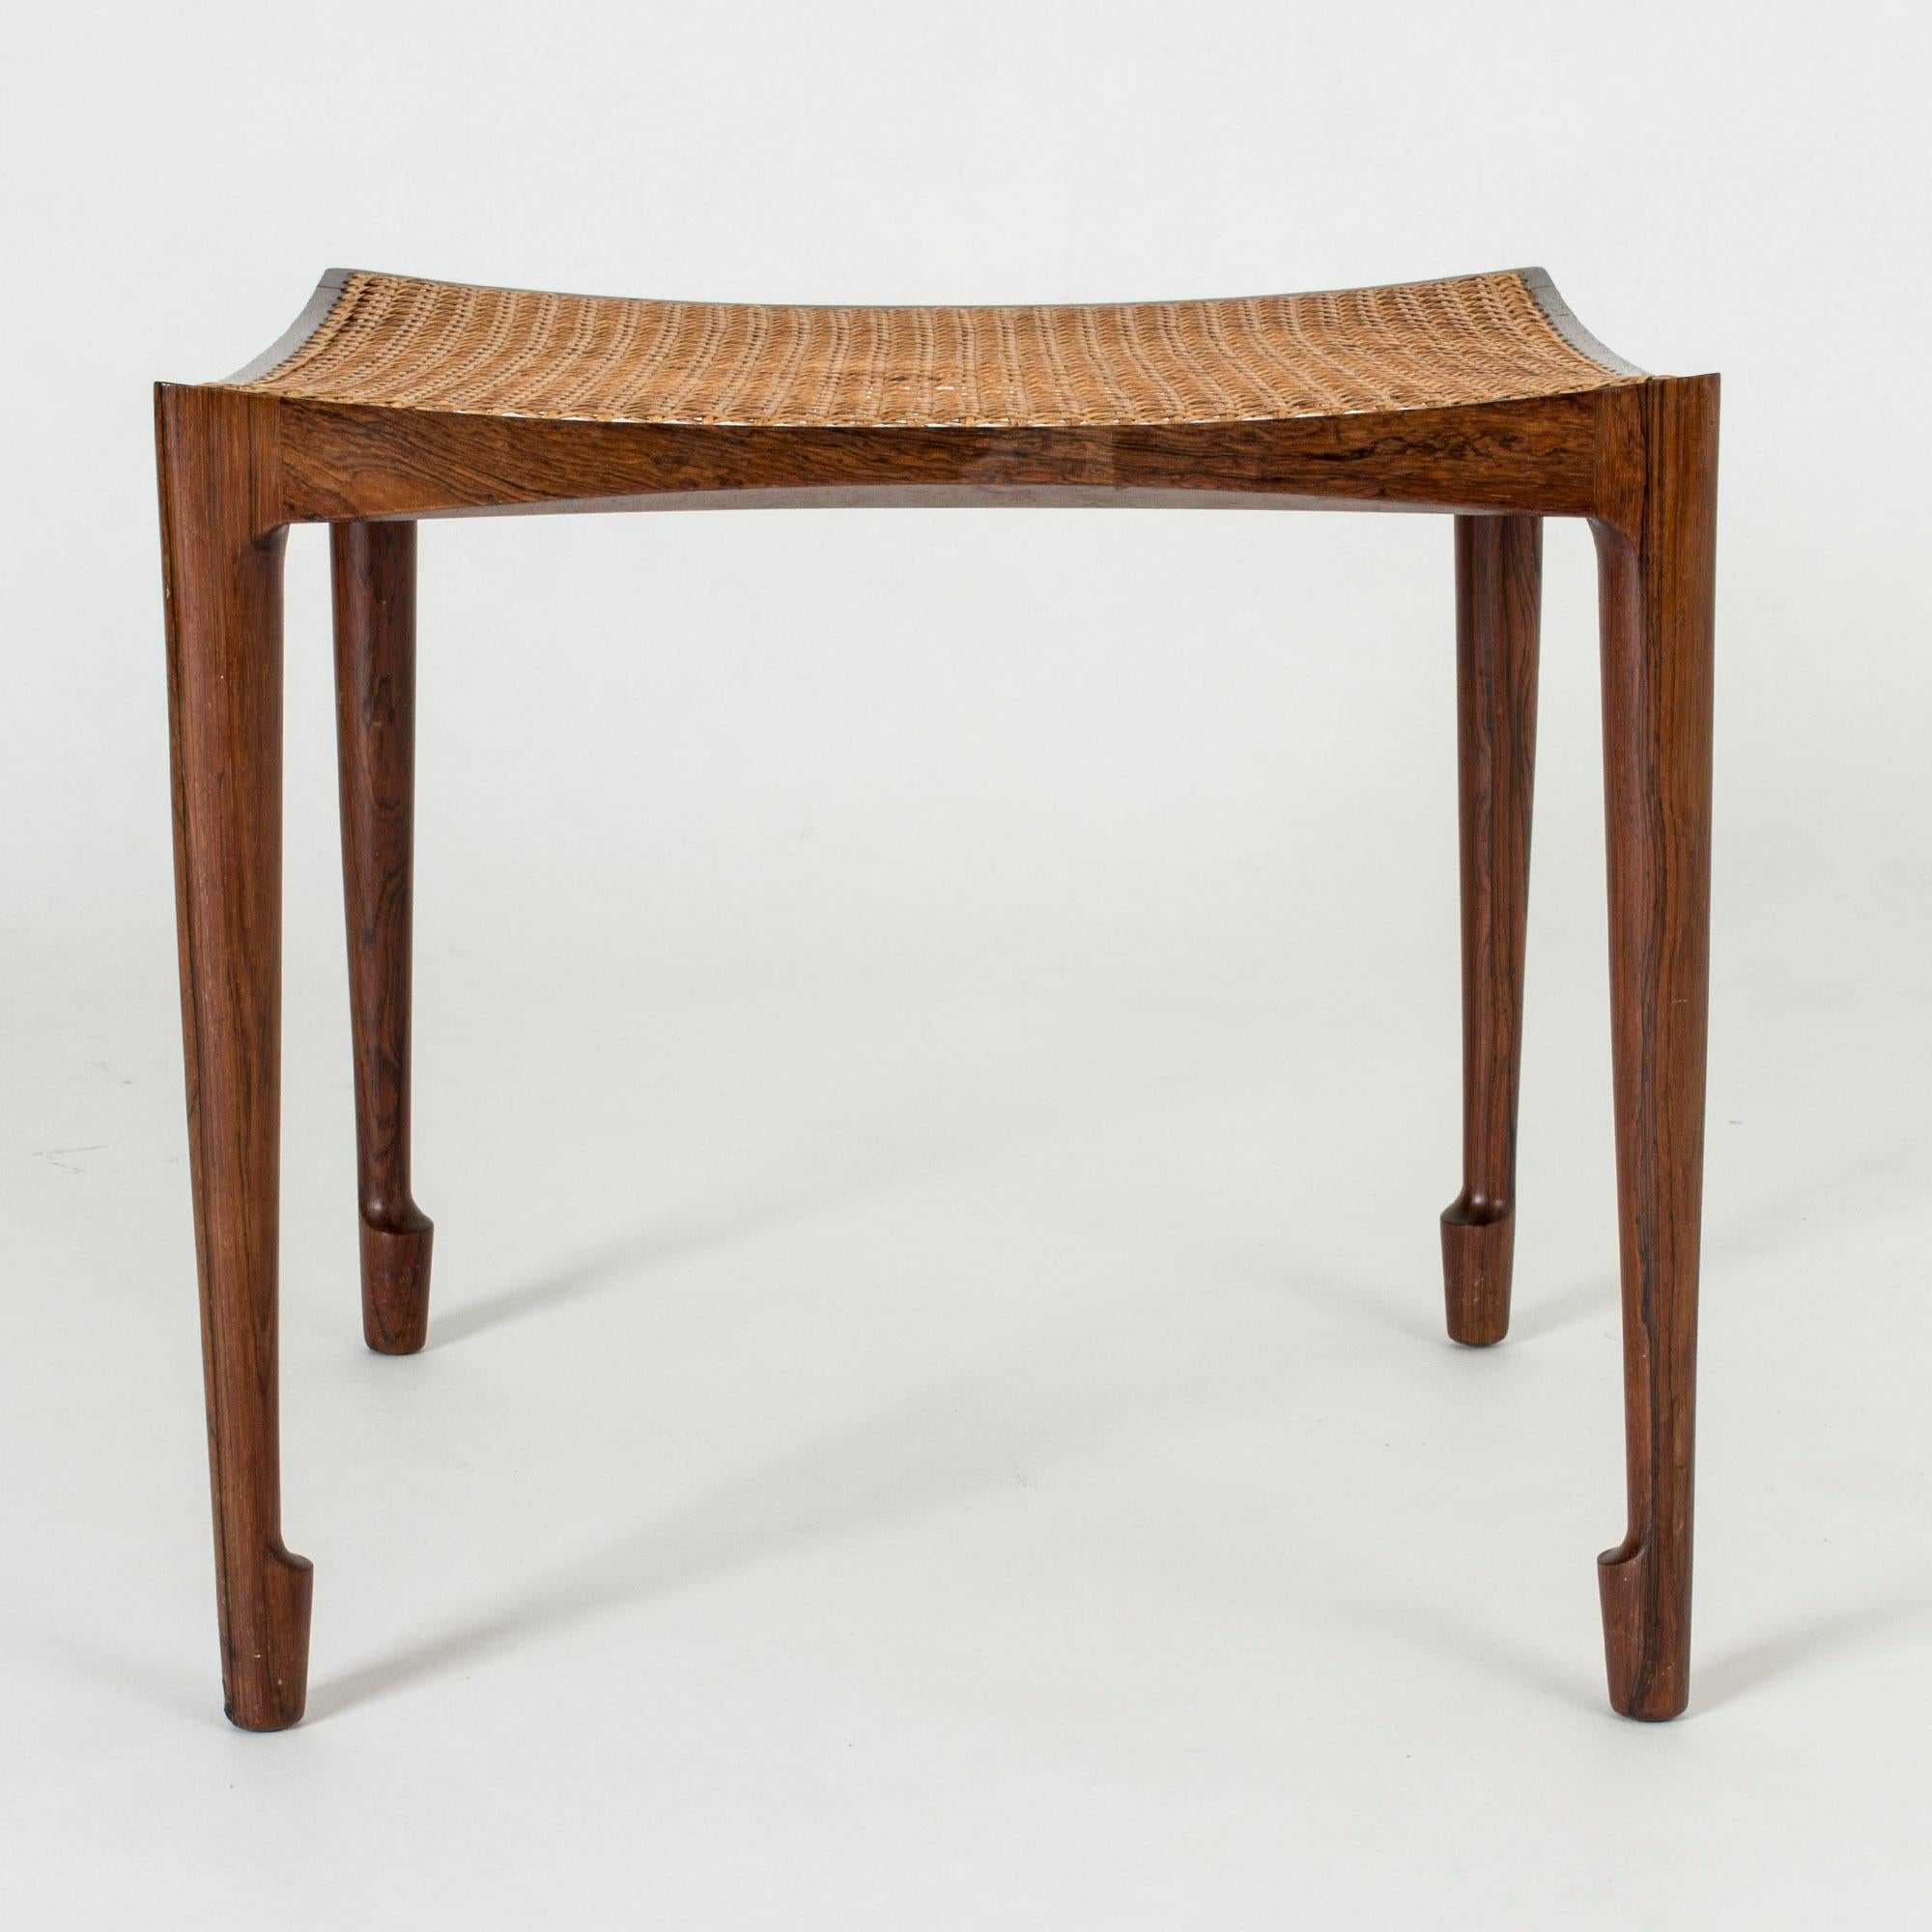 Mid-20th Century Pair of Rosewood and Rattan Stools by Bernt Petersen for Wørts Møbelsnedkeri